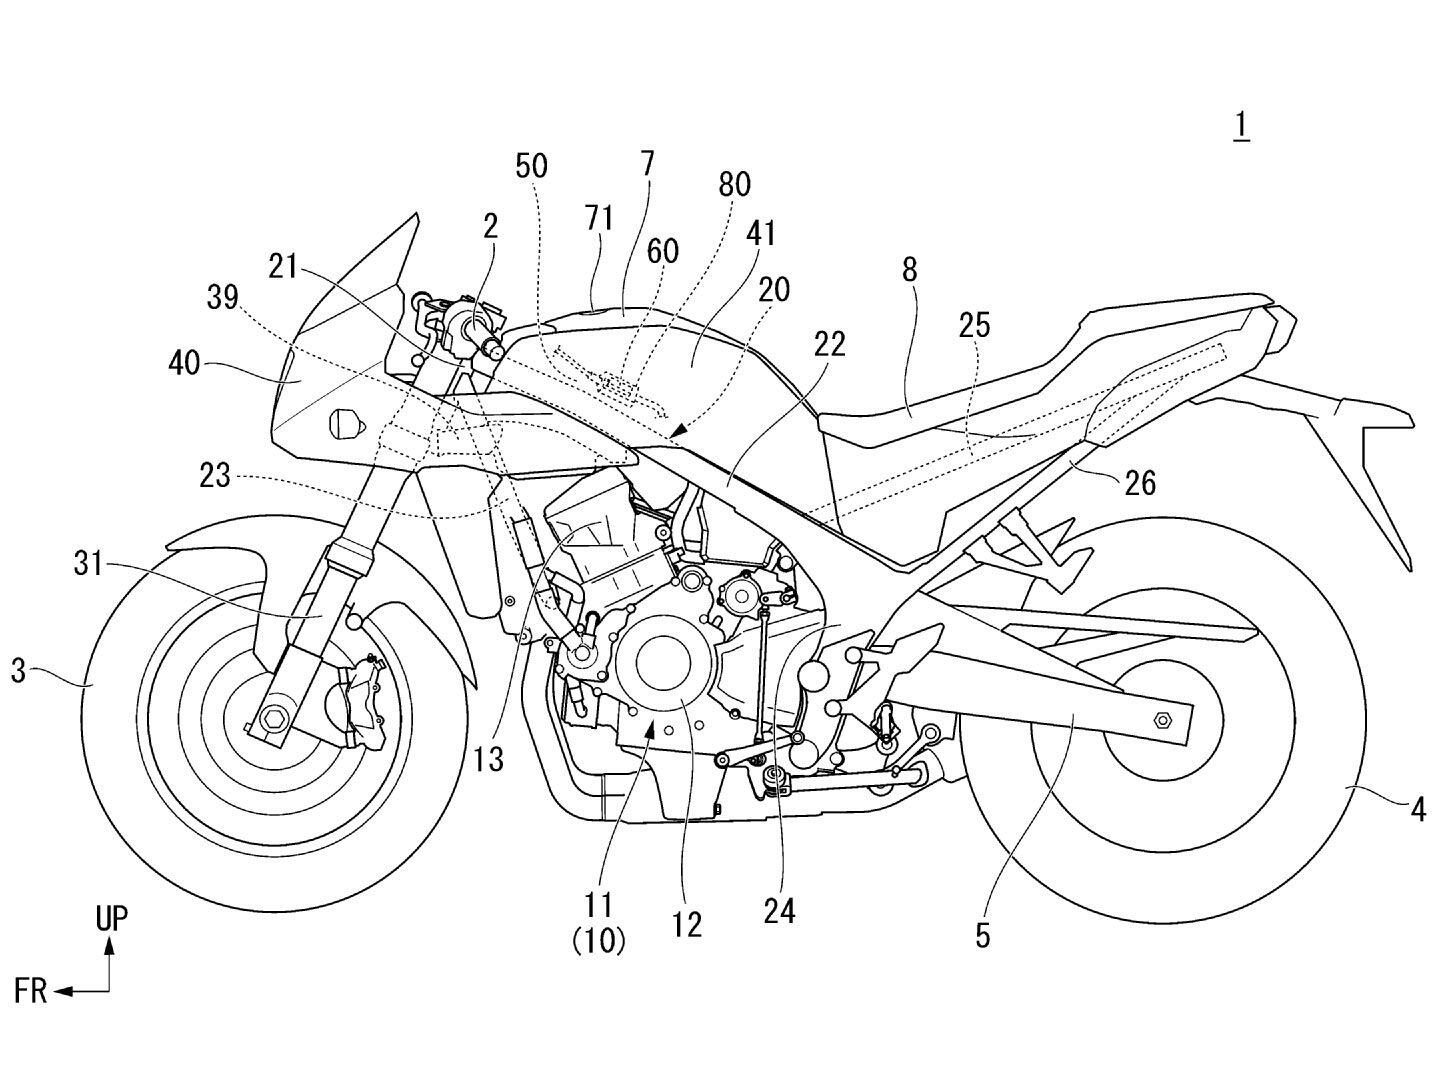 Patent drawings clearly show that Honda is working on a faired version of the Hornet 750.